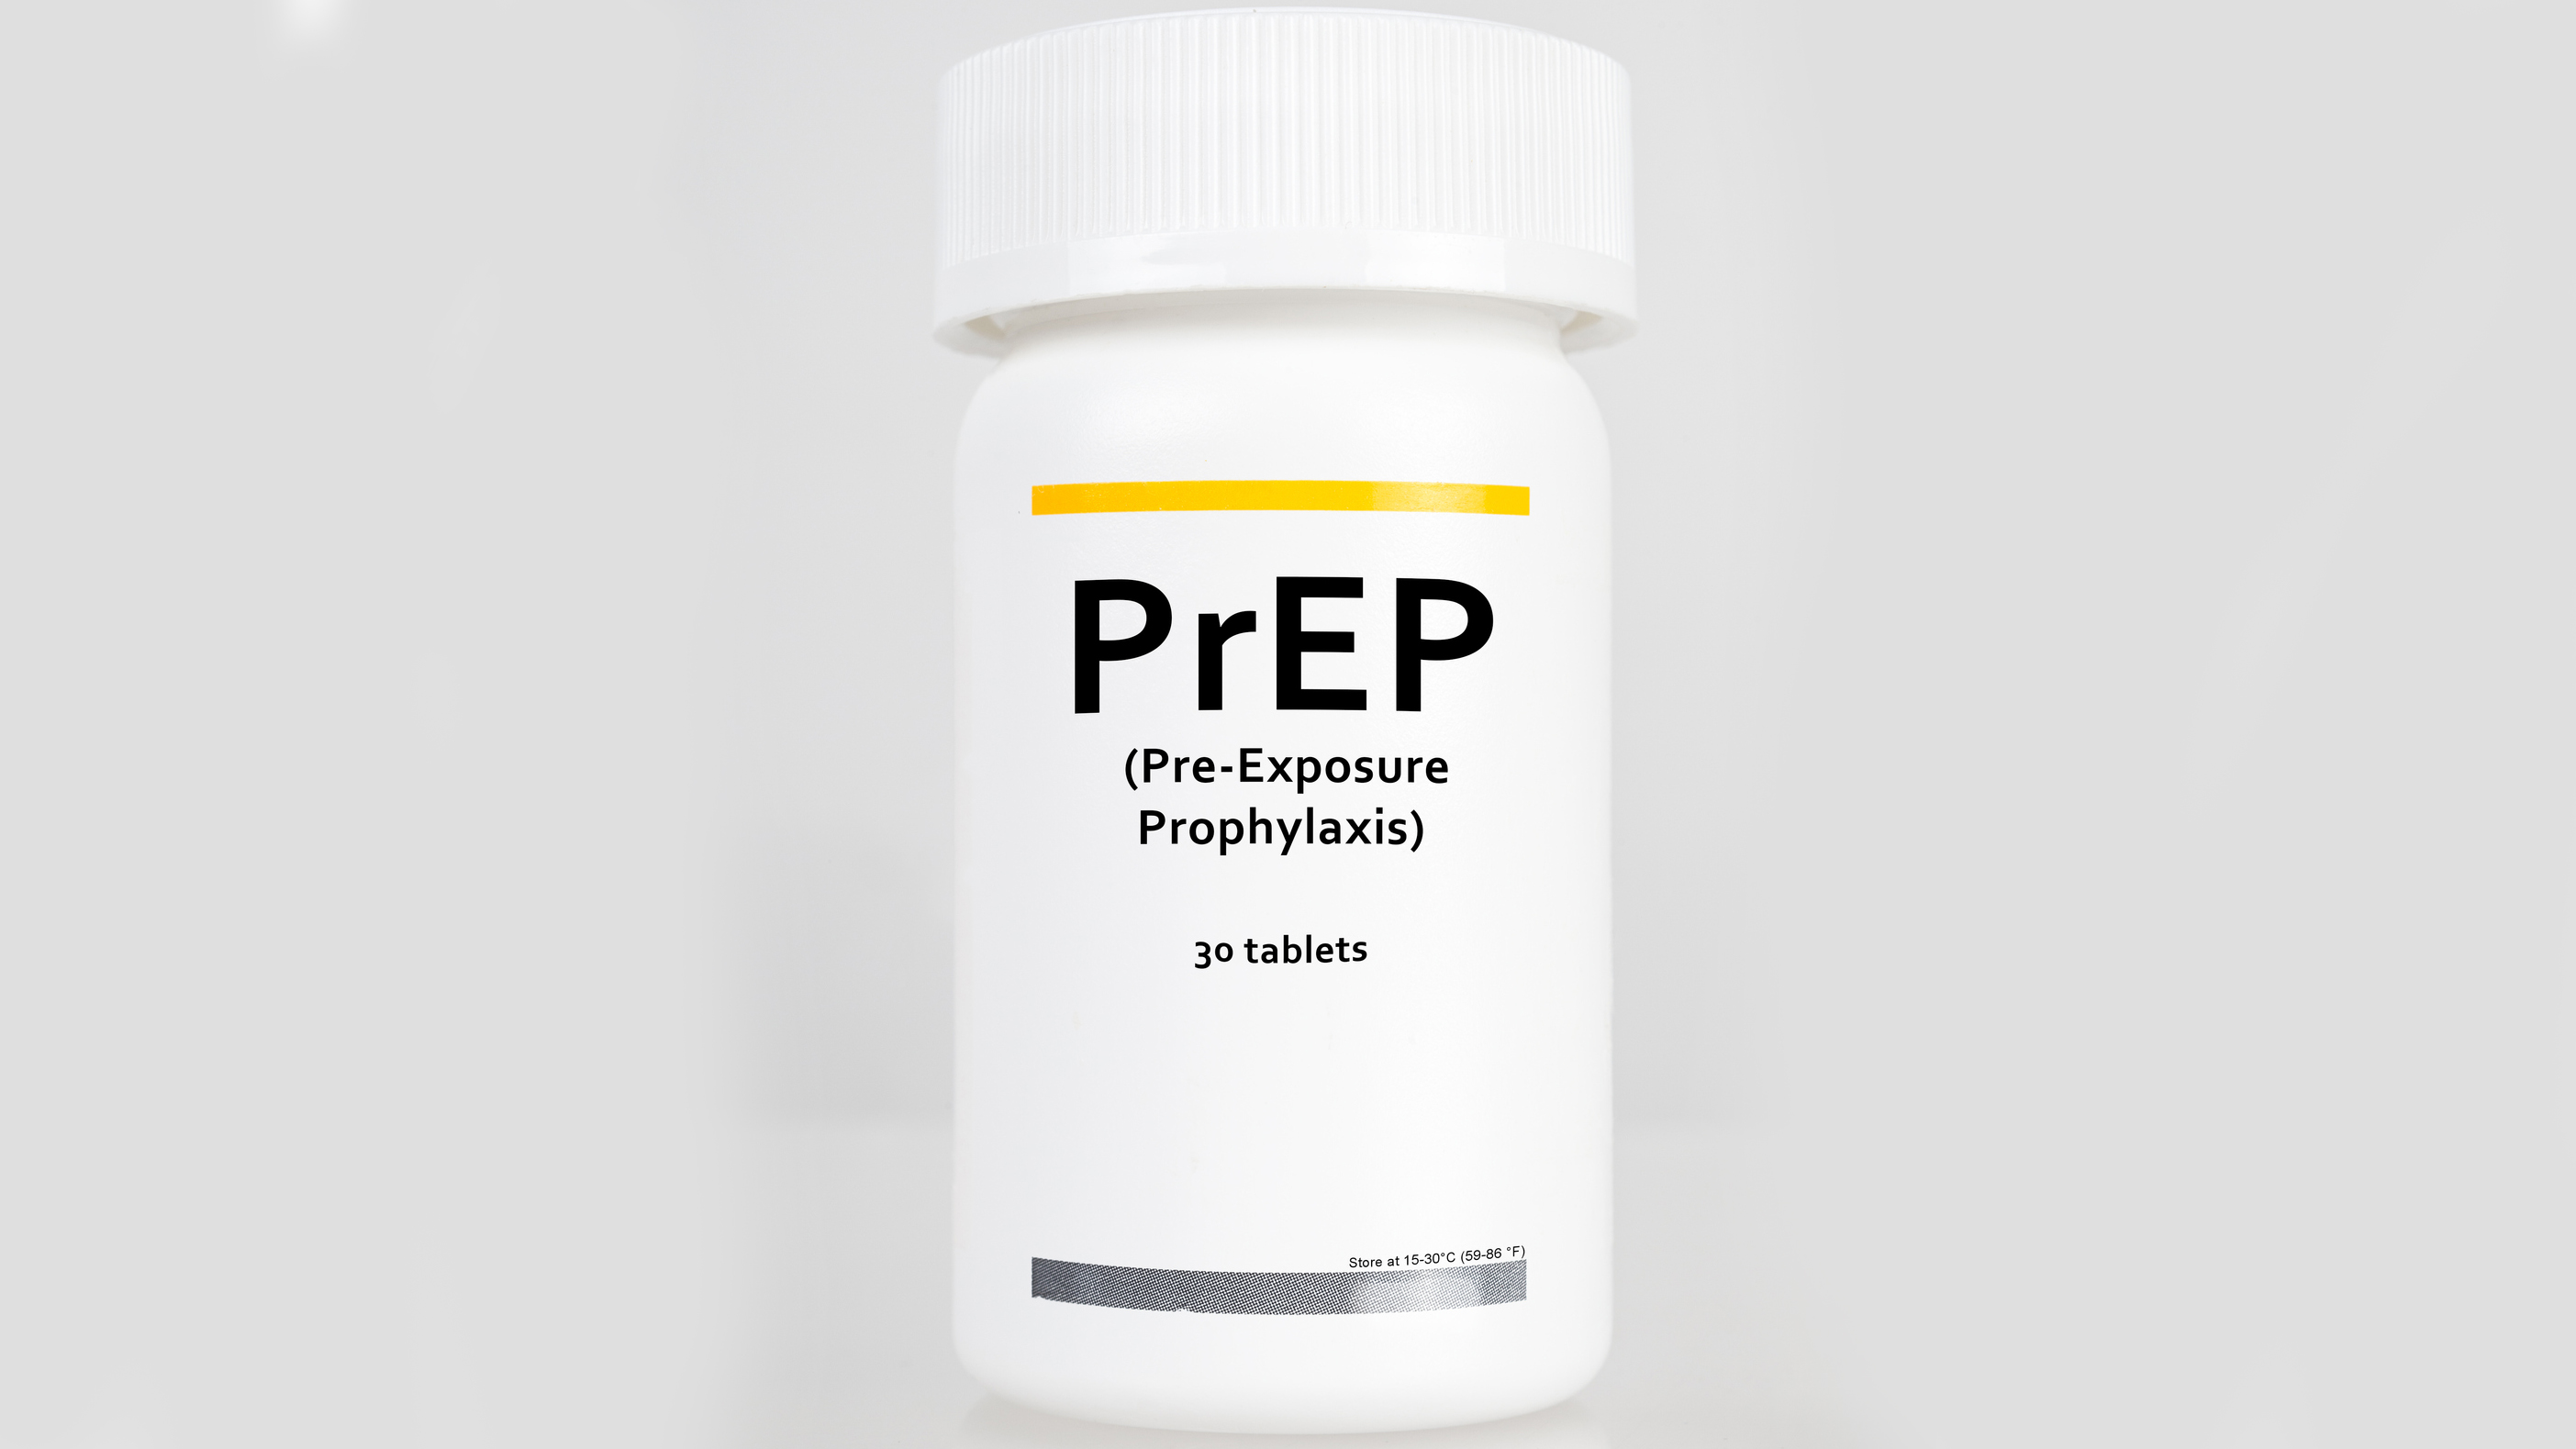 Successful Pilot Integrates PrEP and Syringe Exchange Services to Increase Arsenal of HIV Prevention Tools for Women Who Inject Drugs